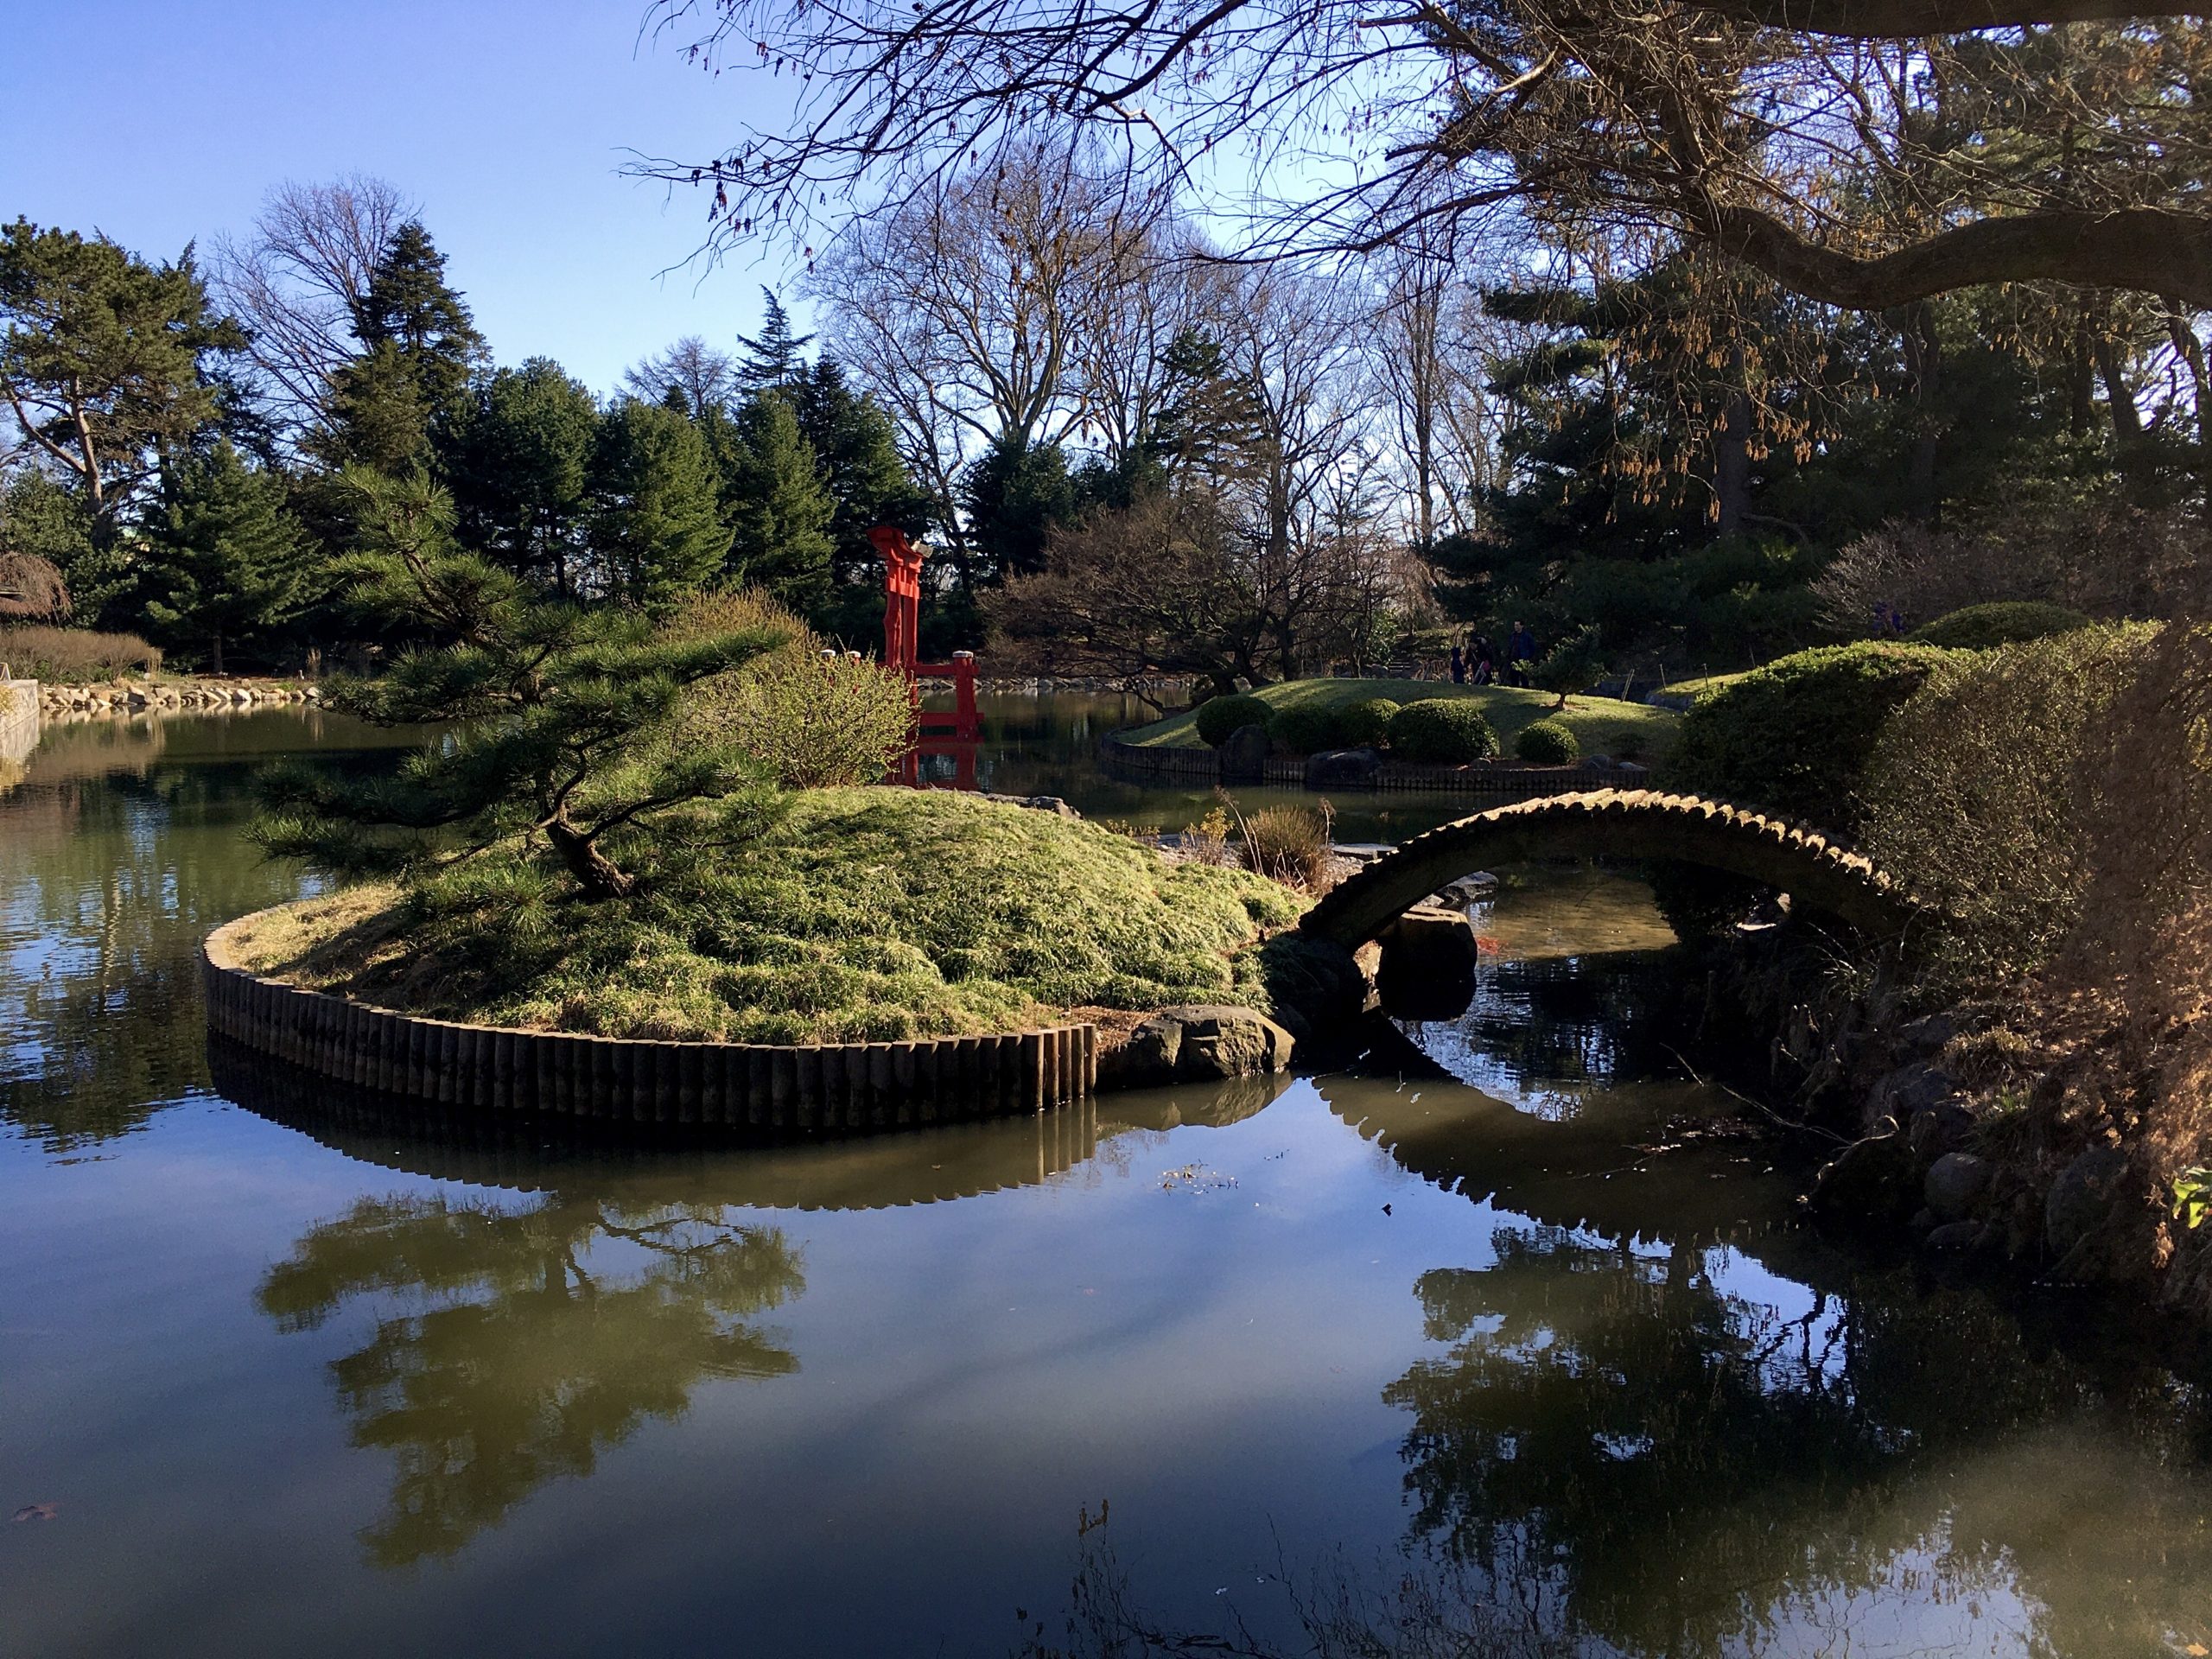 The Japanese Hill-and-Pond Garden looked so picturesque on the day of my visit. Photo: Lore Croghan/Brooklyn Eagle